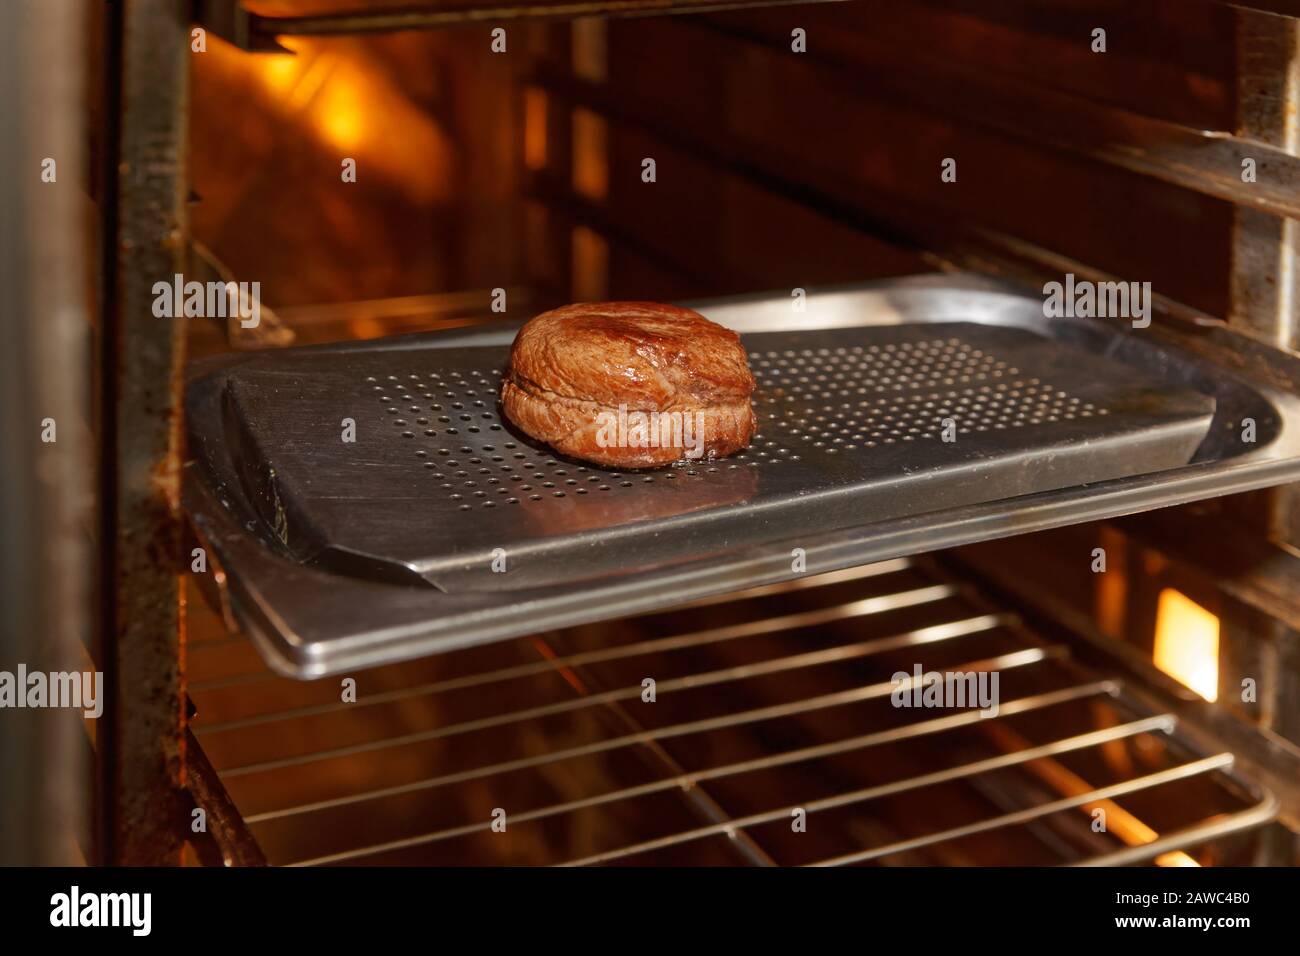 Fillet mignon steak in convection oven, professional restaurant cooking Stock Photo